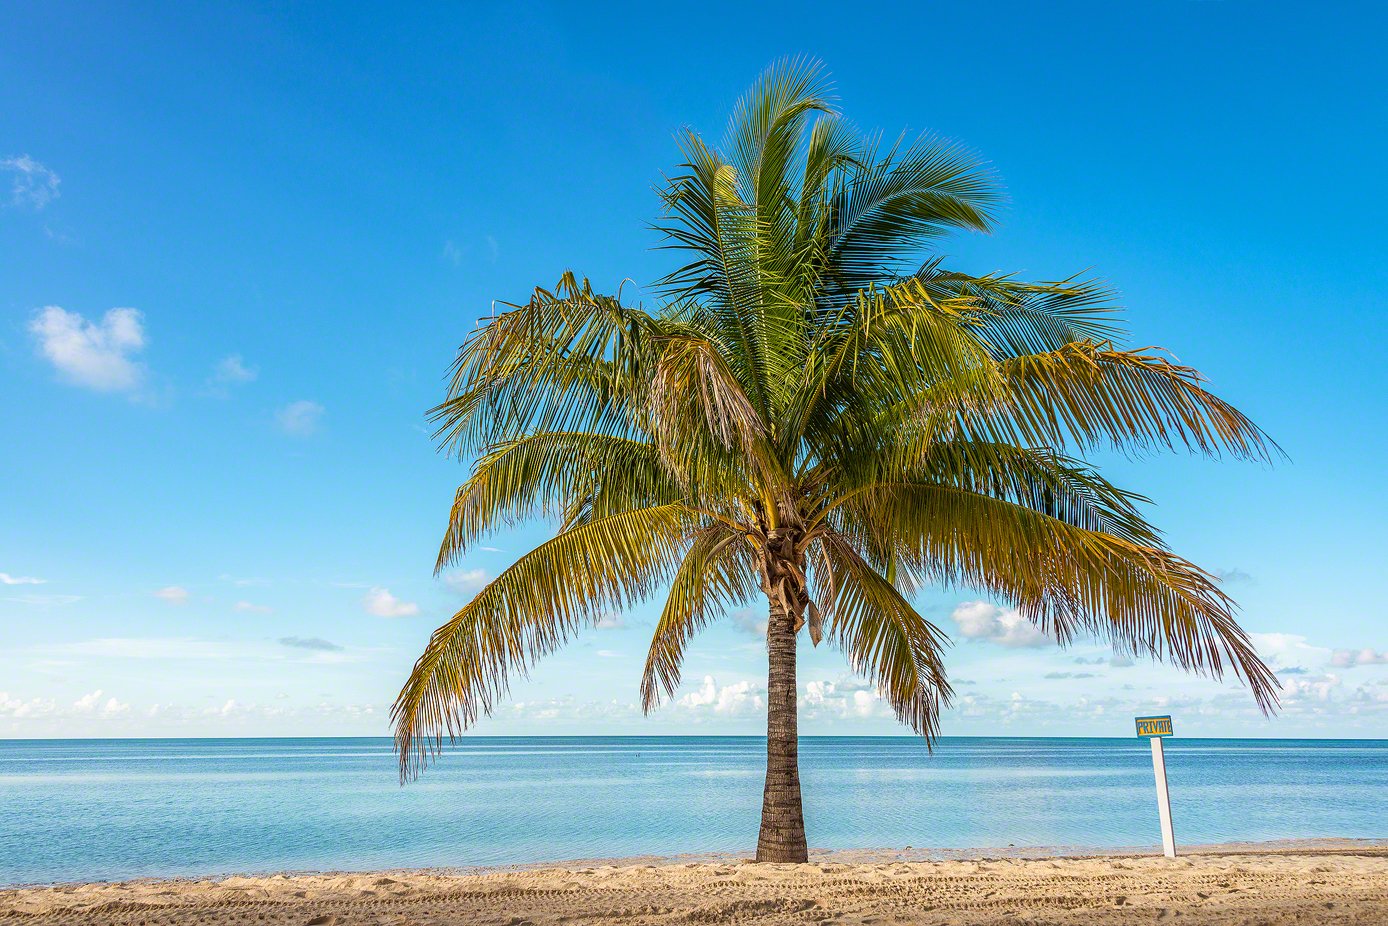 A Photo of a coconut Palm Tree on the beach in the Bahamas